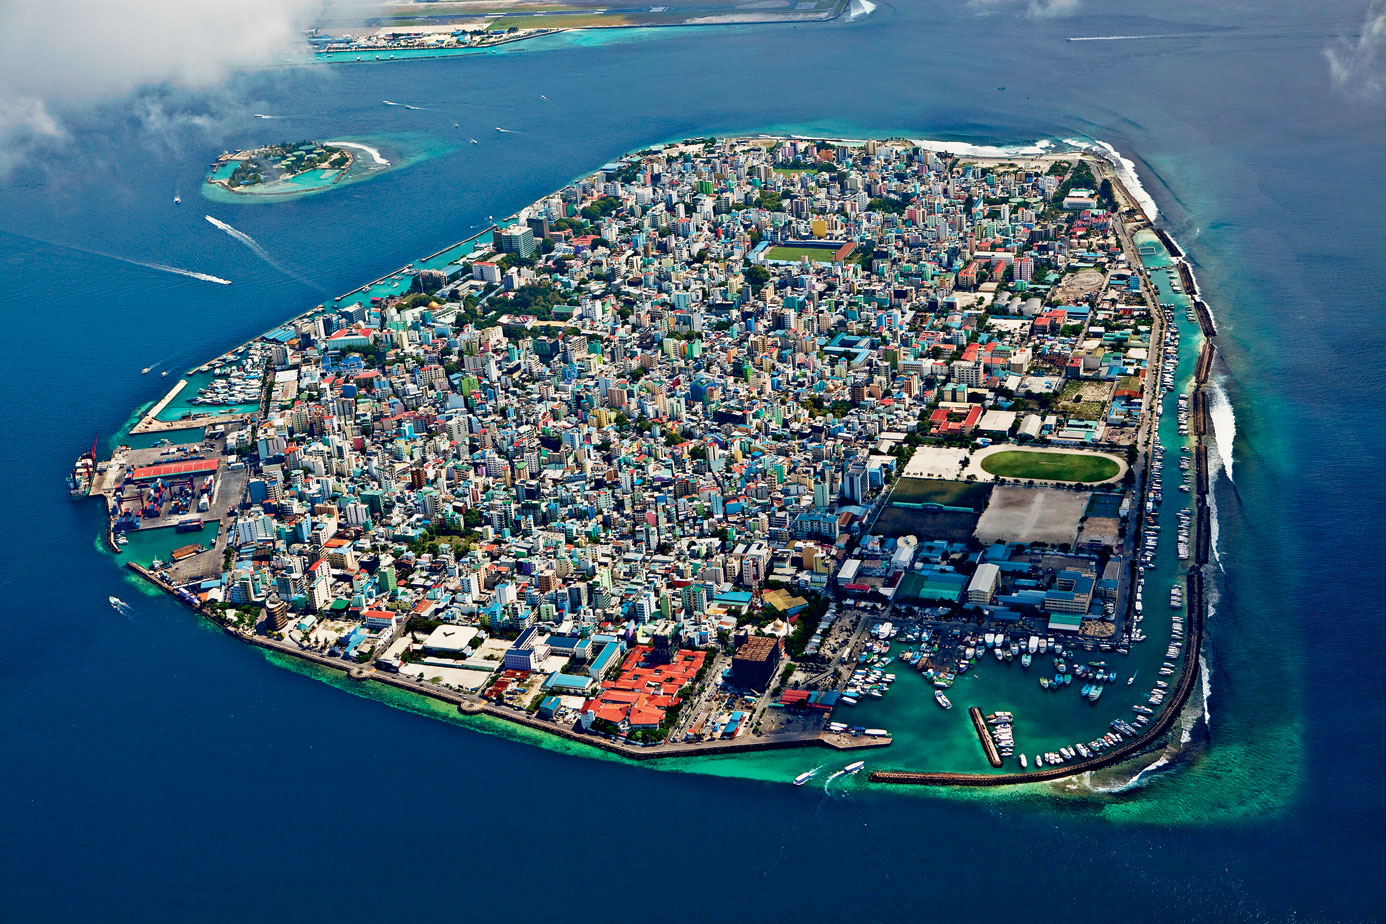 Male, the capital city of the Maldives